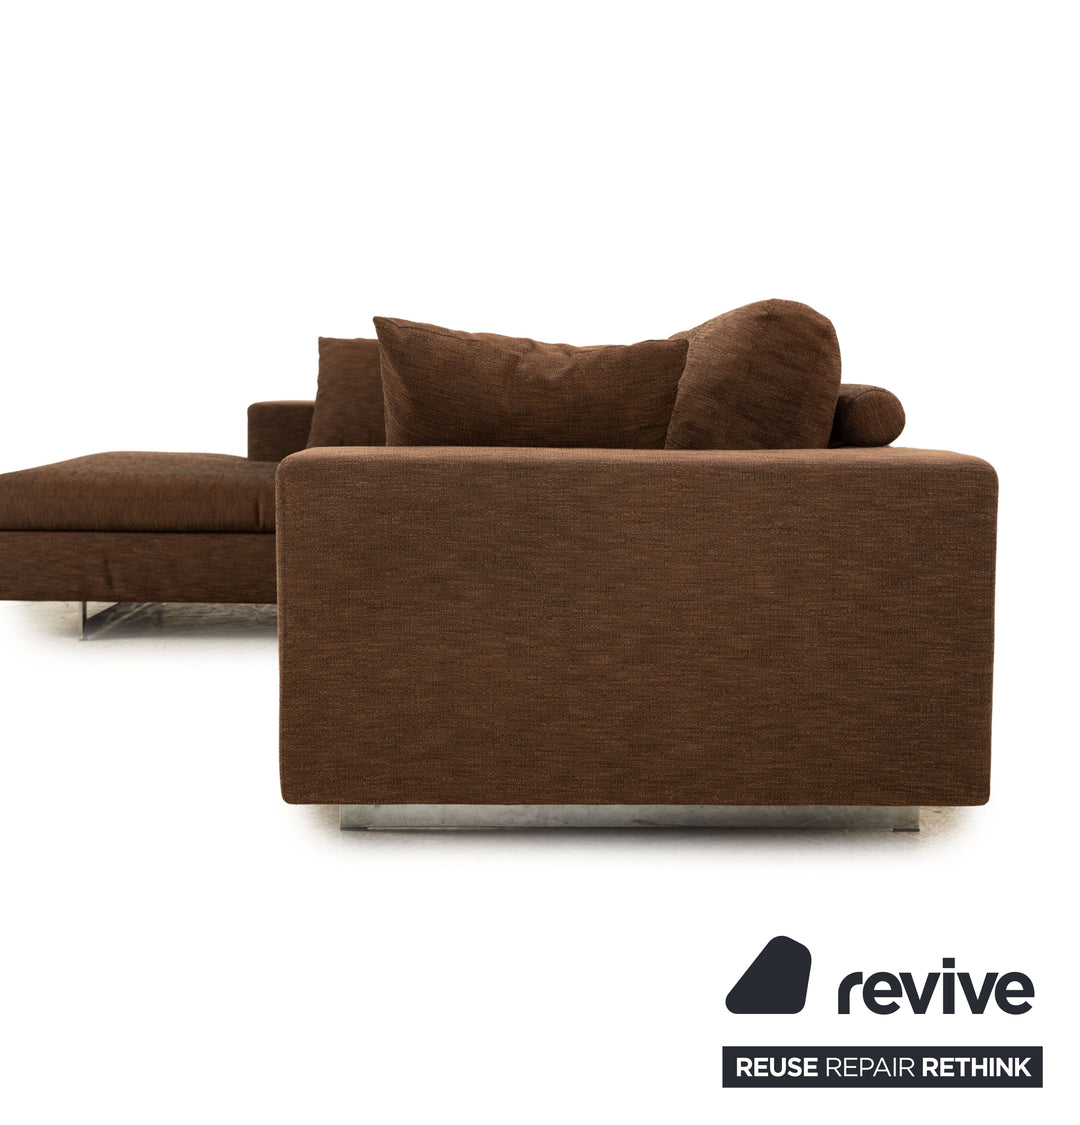 Who's Perfect Luca Fabric Corner Sofa Brown Recamiere Left Sofa Couch